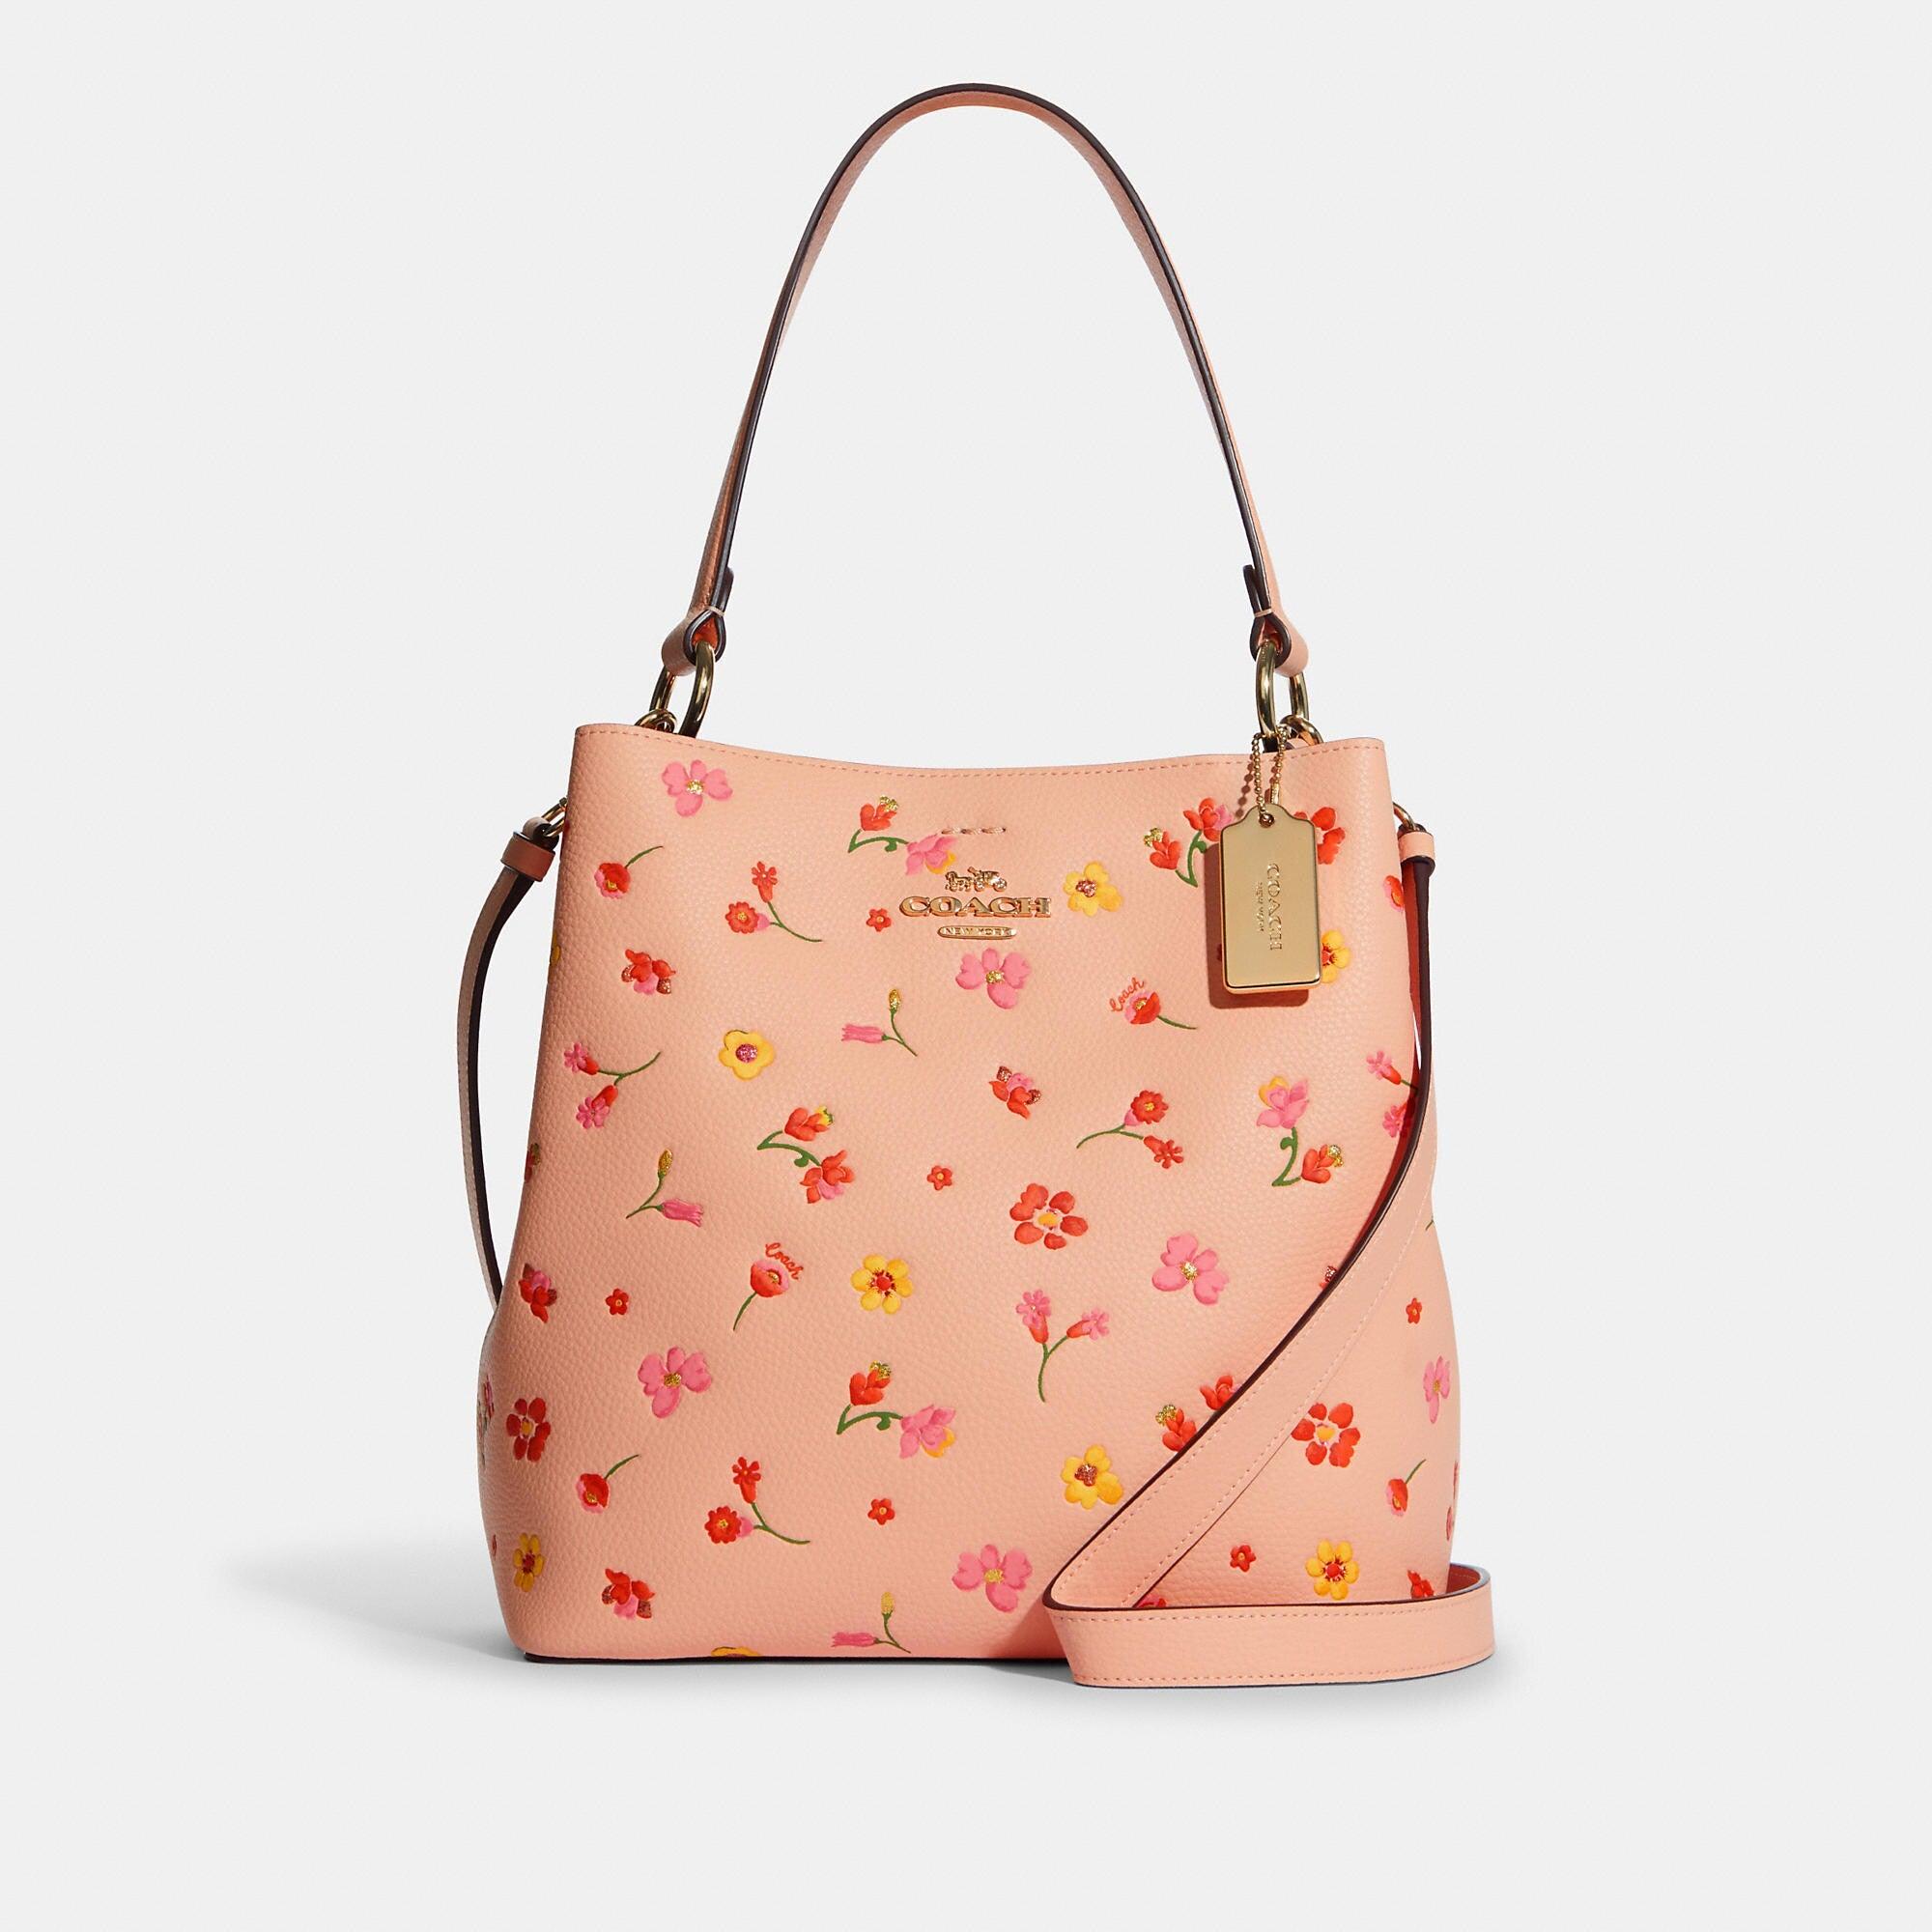 Coach City Tote With Mystical Floral Print